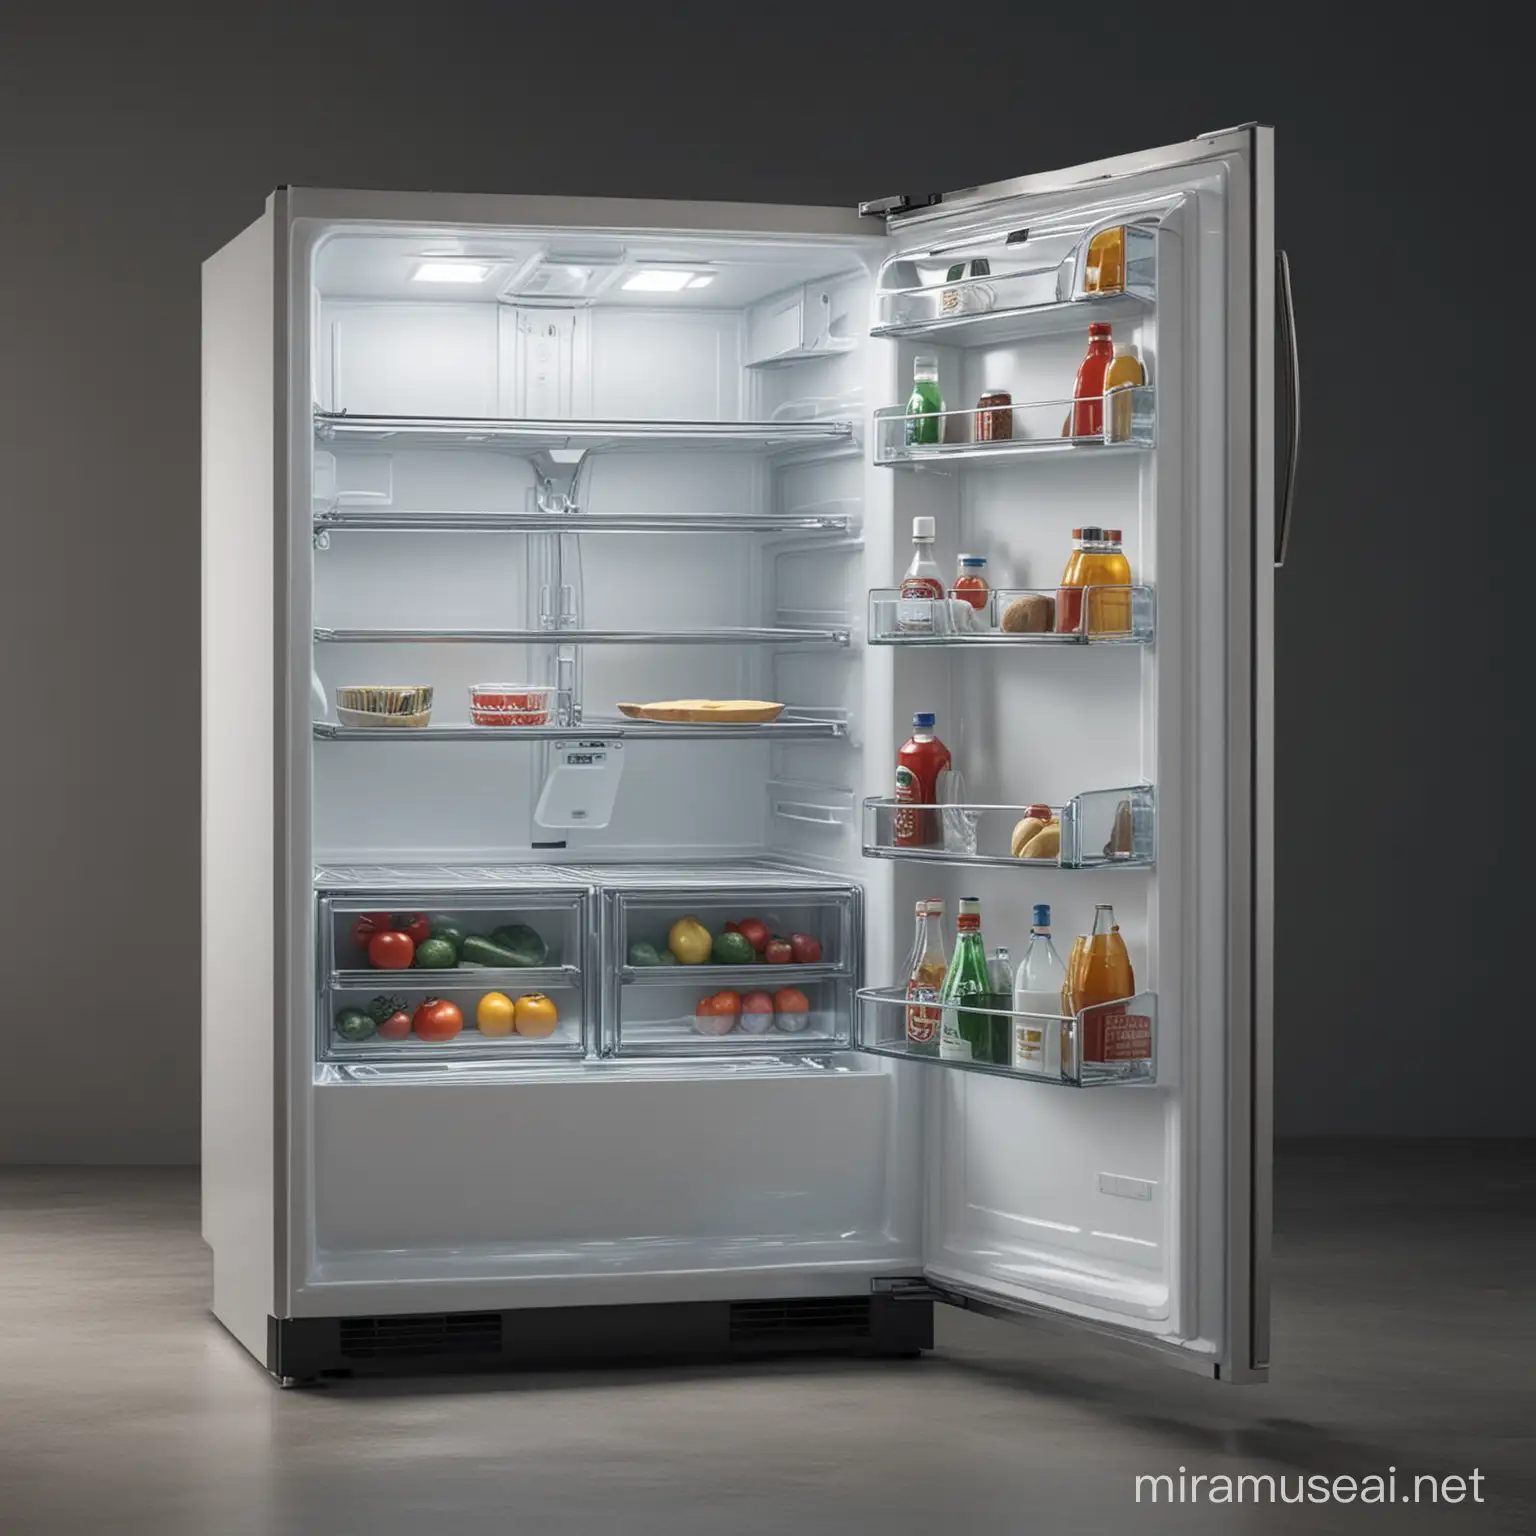 Empty Refrigerator at Night Realistic View of Kitchen